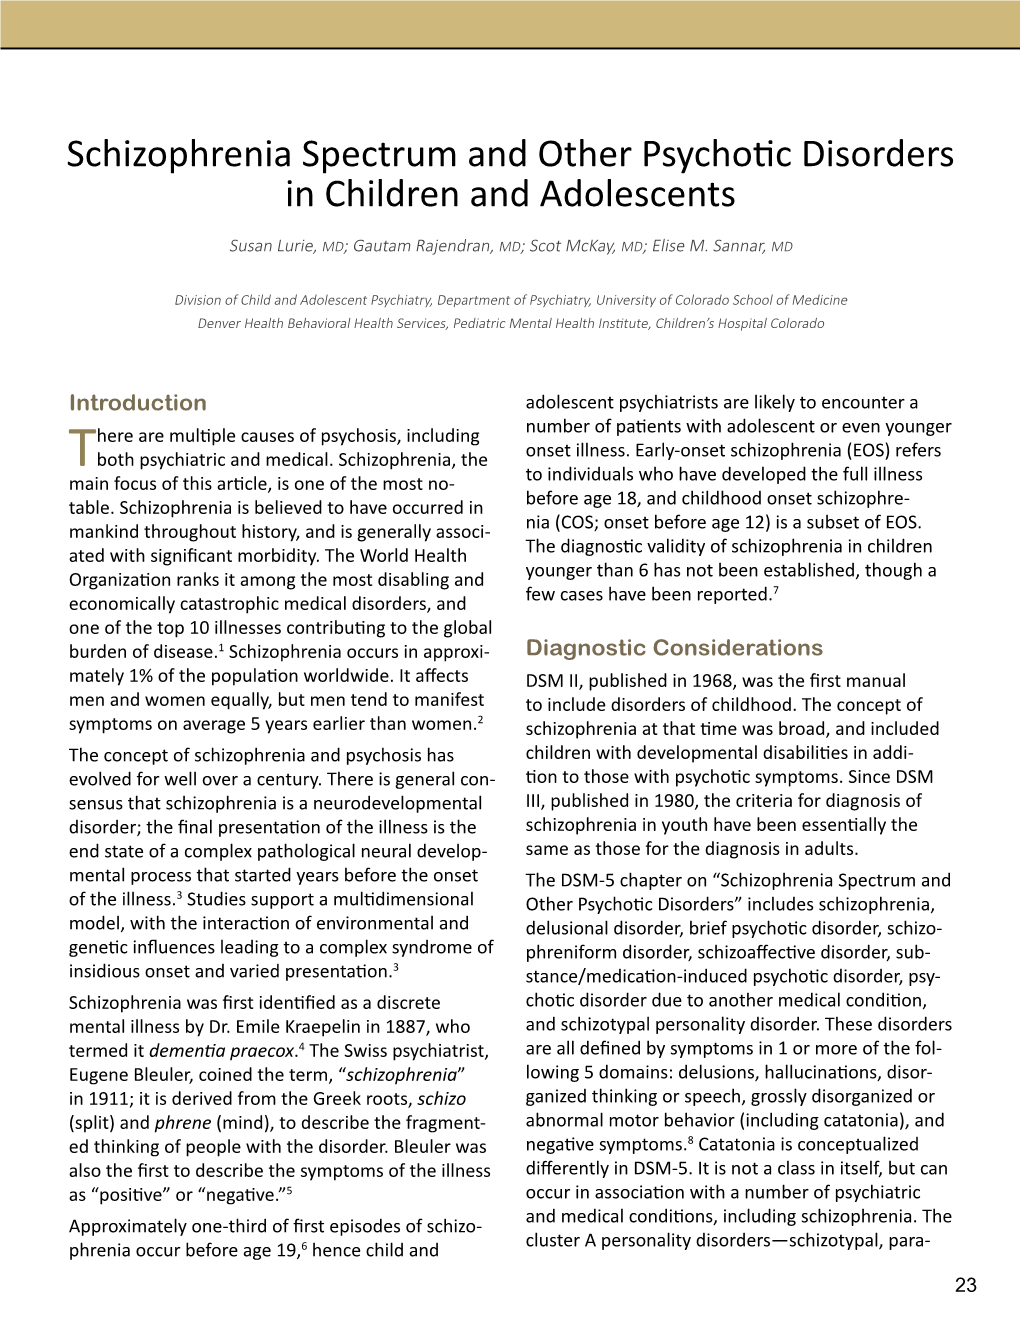 Schizophrenia Spectrum and Other Psychotic Disorders in Children and Adolescents